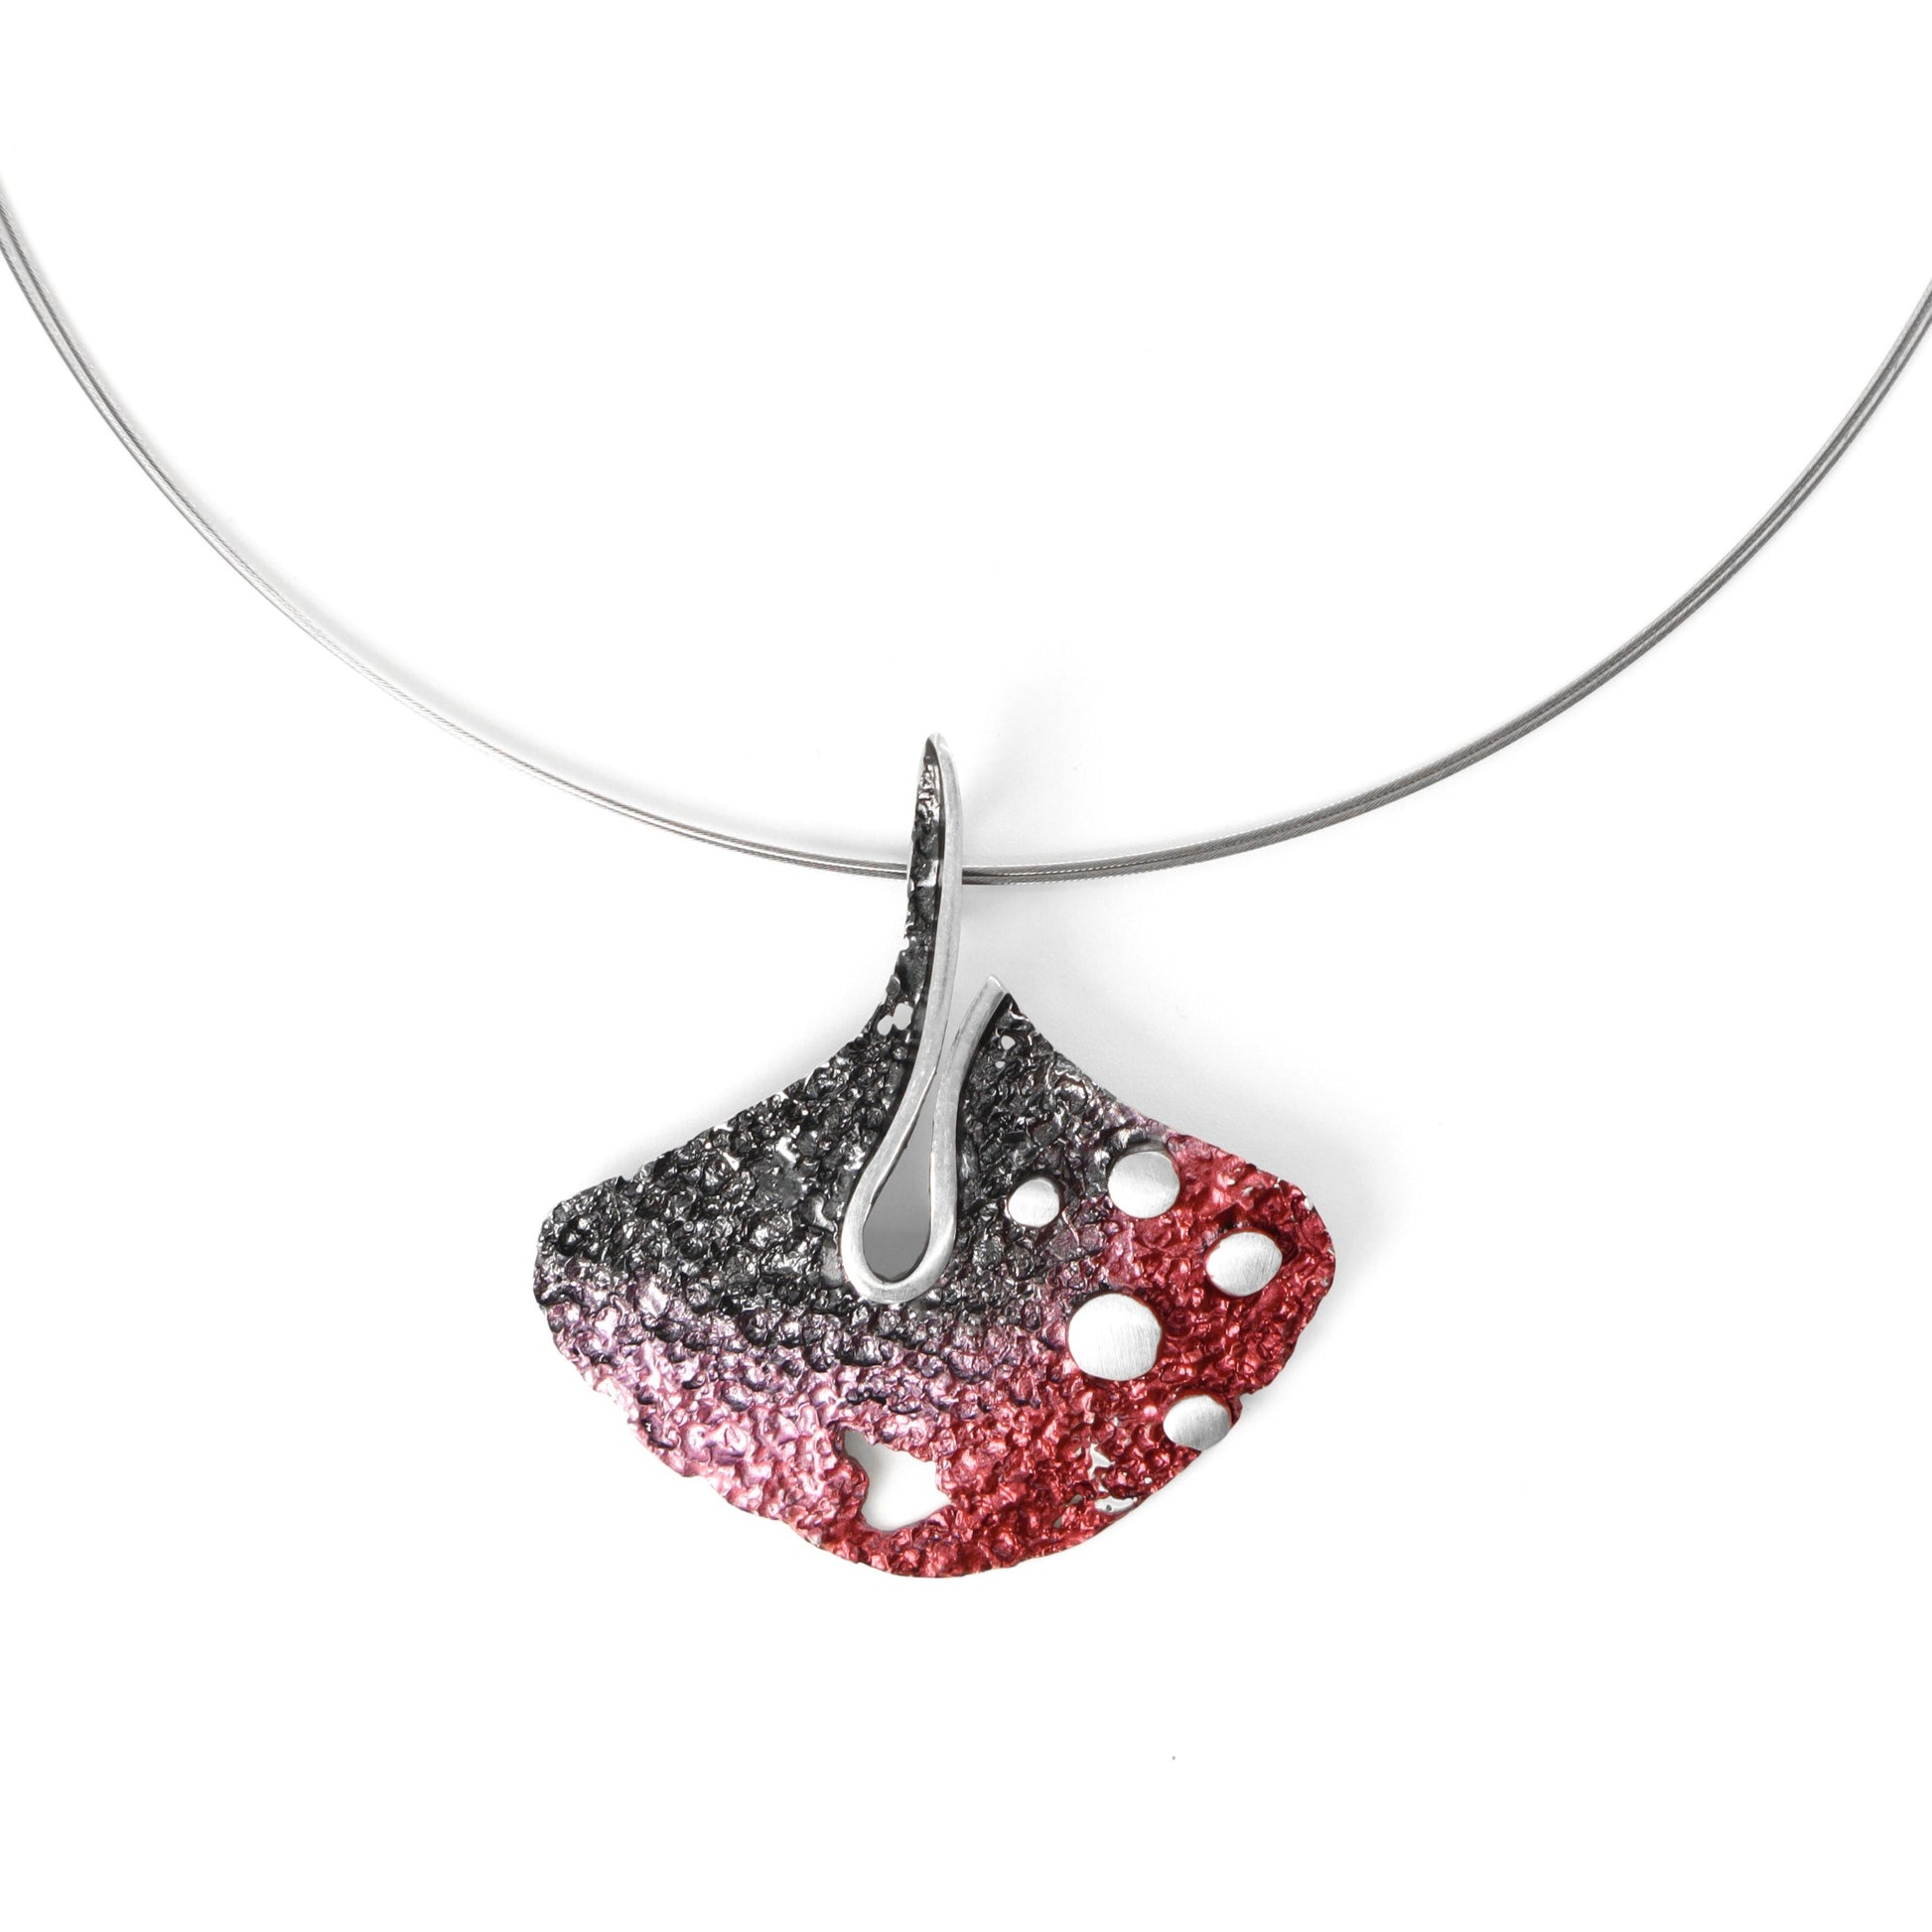 sterling silver stingray necklace with natural red pigment. 16 inch stainless steel cable